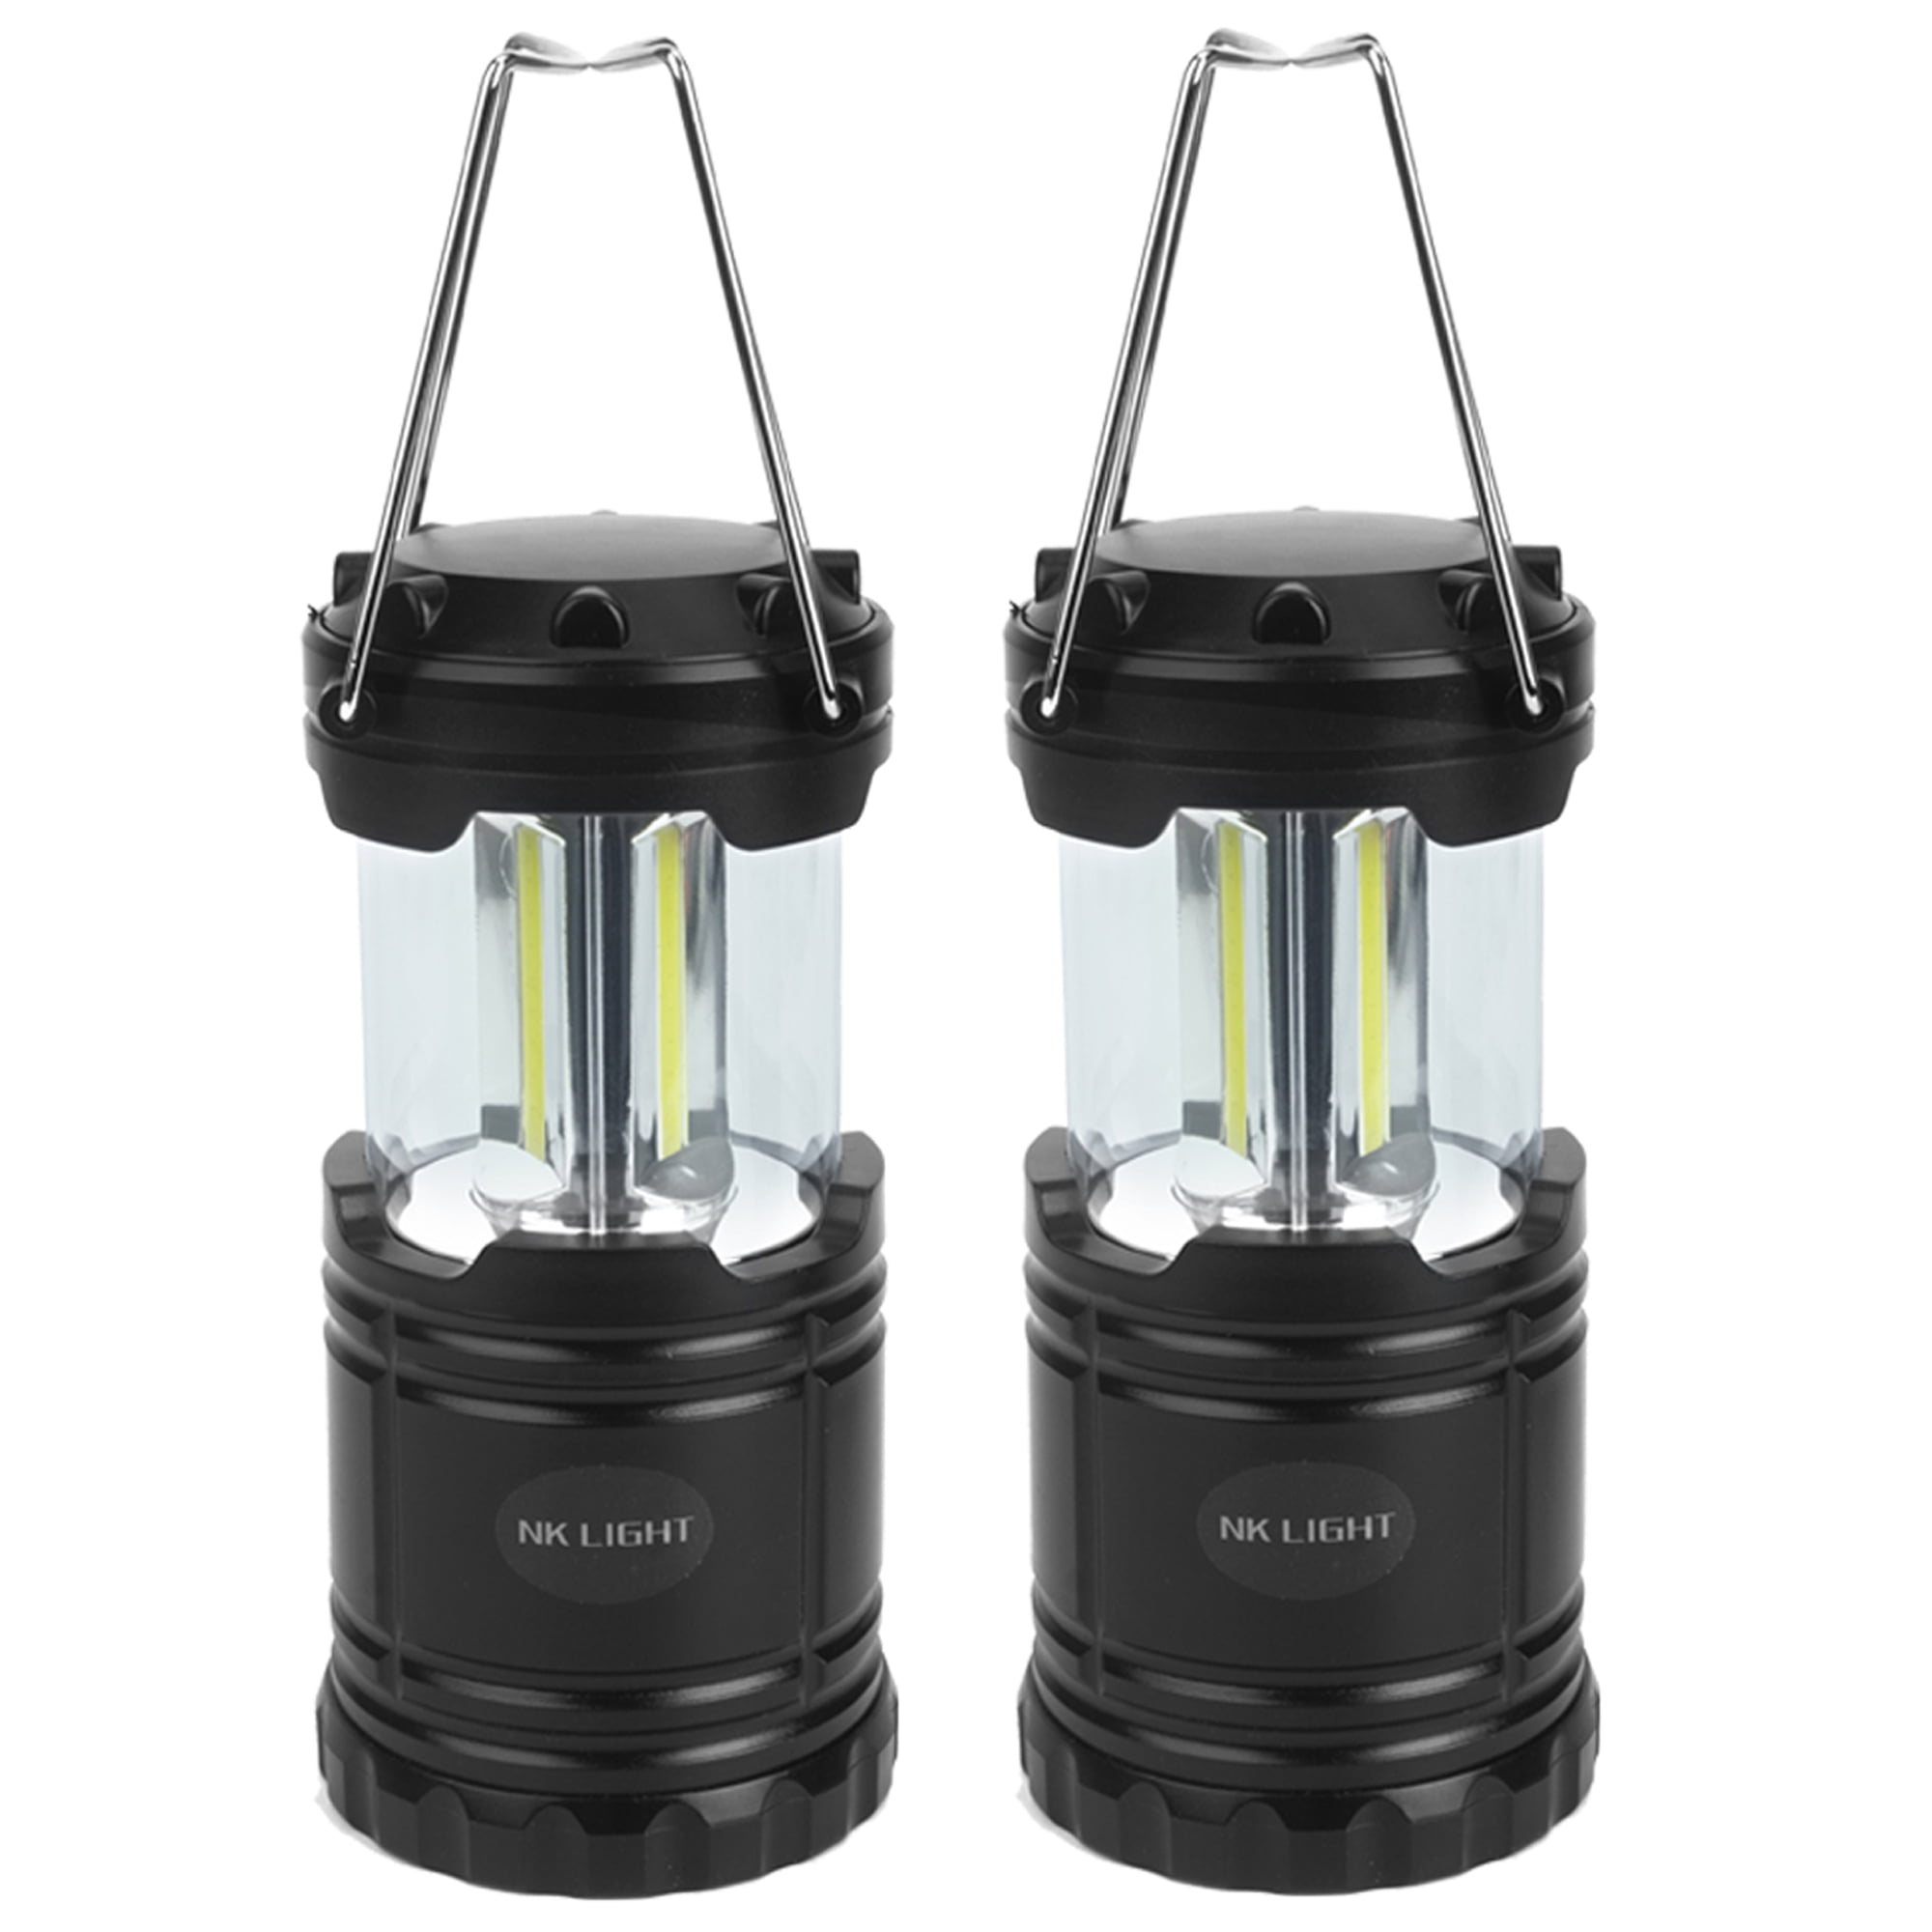 SAYFUT 1-4 Pack LED Electric Lanterns, Outdoor Zambia